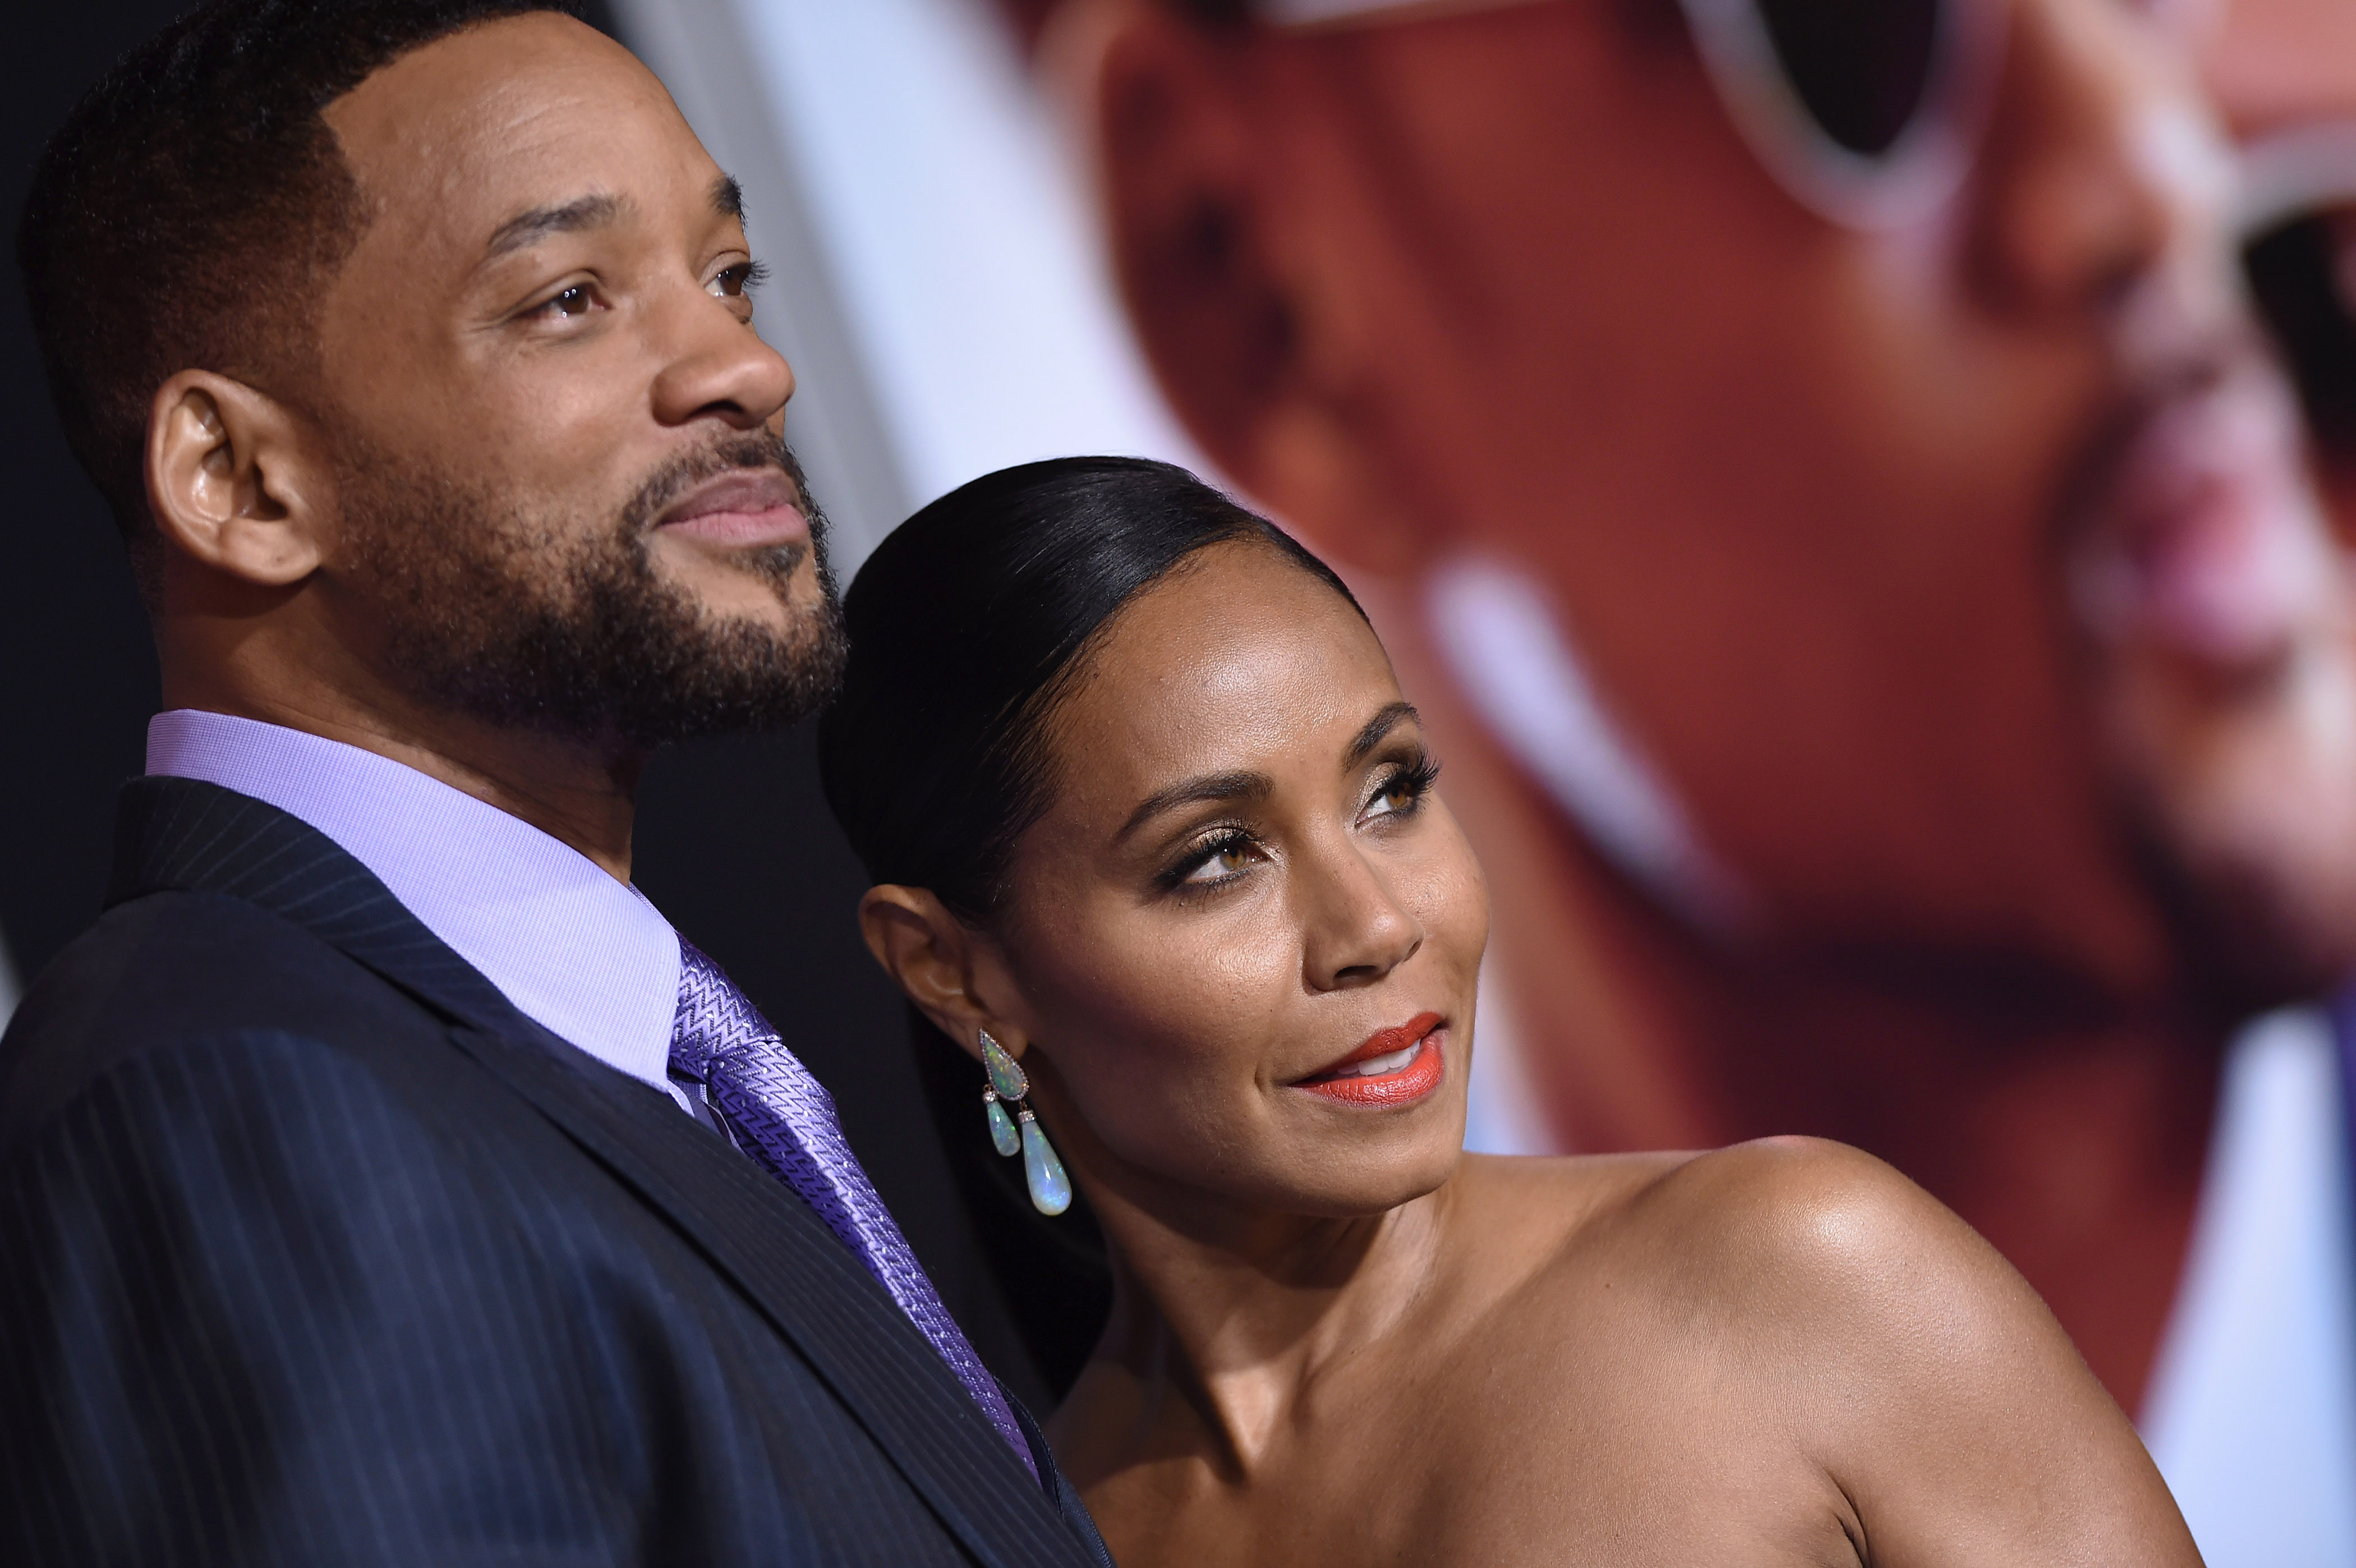 Will Smith and Jada Pinkett Smith at the premiere of Focus in 2015.